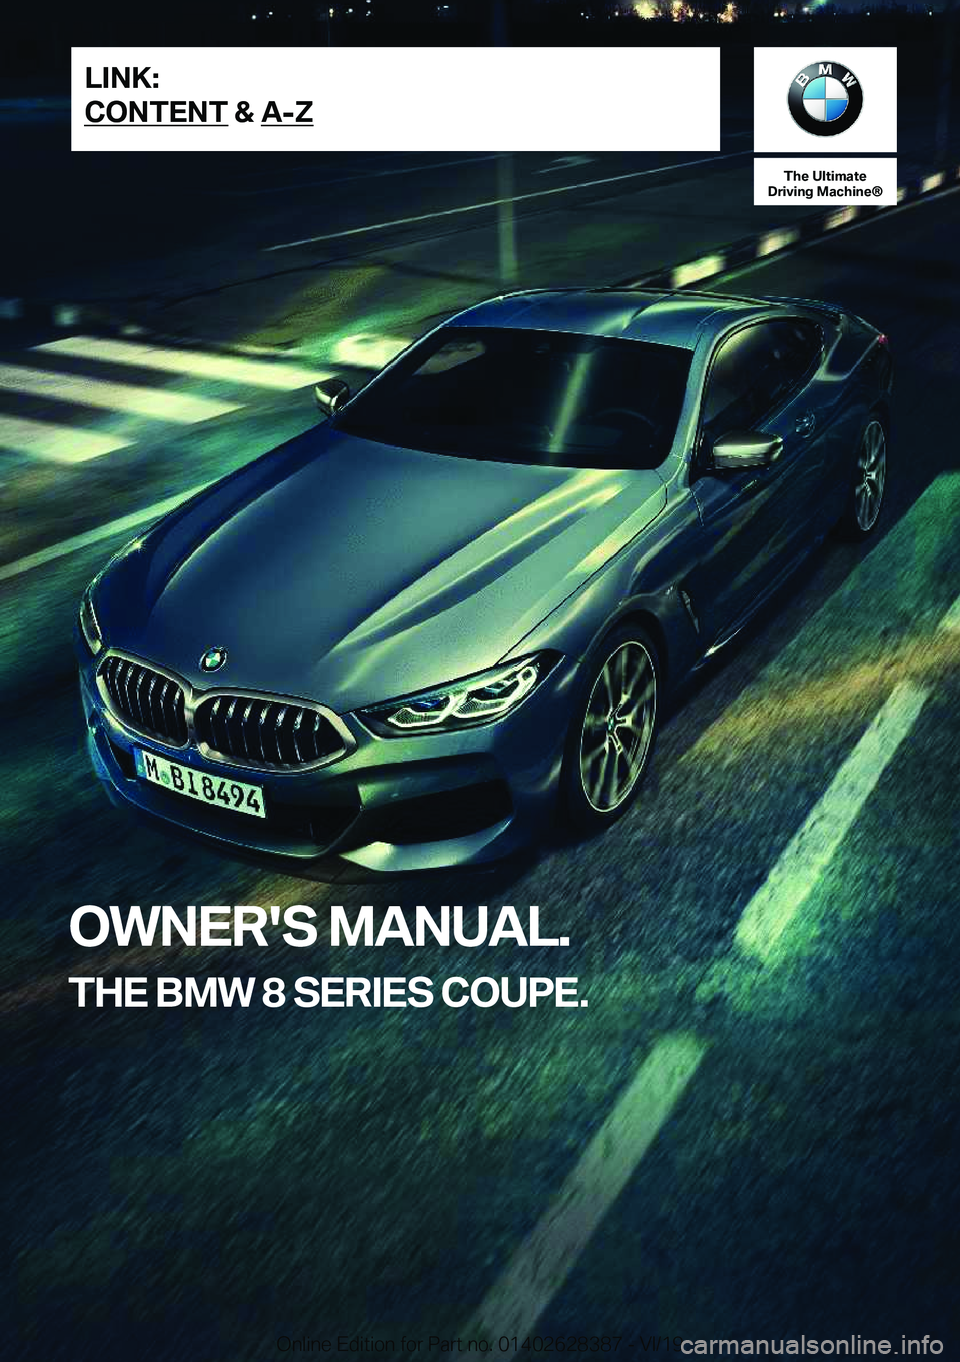 BMW 8 SERIES COUPE 2020  Owners Manual �T�h�e��U�l�t�i�m�a�t�e
�D�r�i�v�i�n�g��M�a�c�h�i�n�e�n
�O�W�N�E�R�'�S��M�A�N�U�A�L�.
�T�H�E��B�M�W��8��S�E�R�I�E�S��C�O�U�P�E�.�L�I�N�K�:
�C�O�N�T�E�N�T��&��A�-�Z�O�n�l�i�n�e��E�d�i�t�i